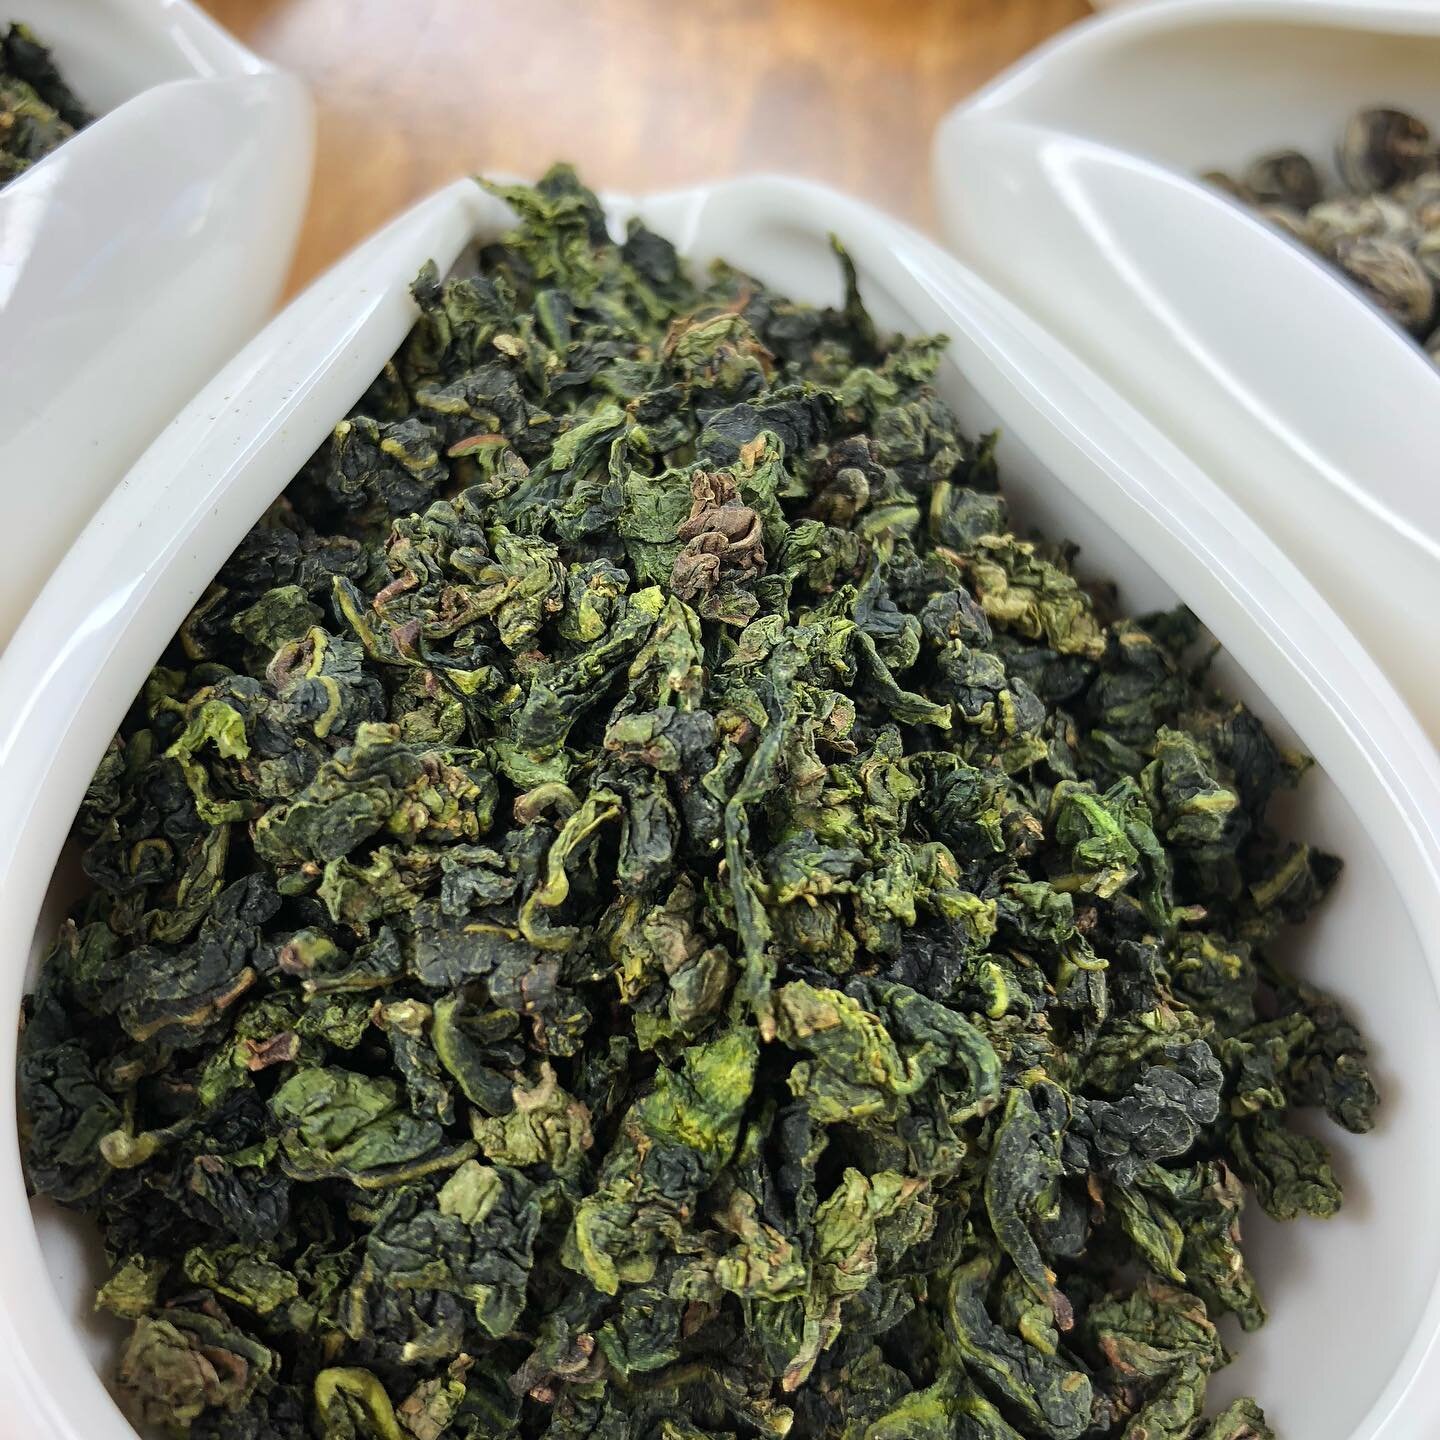 Iron Goddess Oolong Tea! Fancy Grade Tie Guan Yin is made from a genuine varietal of Tie Guan Yin from Gande village in Anxi County of Fujian province. The tea is full of flavor and aroma, smooth but with a bitter-sweet aftertaste. Come enjoy a cup o